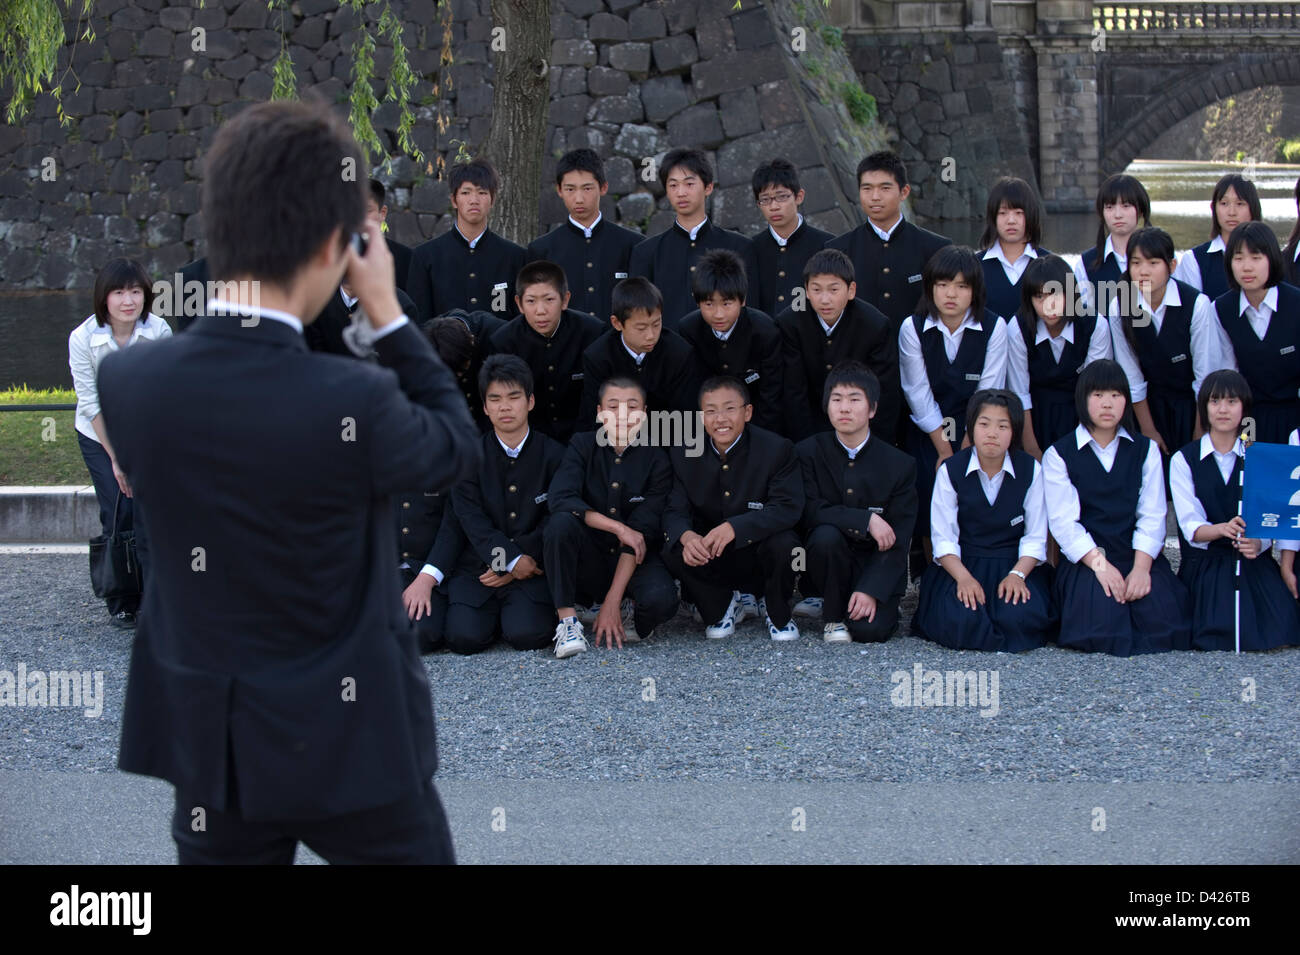 Group of high school students in uniform posing for commemorative photo at Tokyo's famous Imperial Palace Nijubashi Bridge Stock Photo